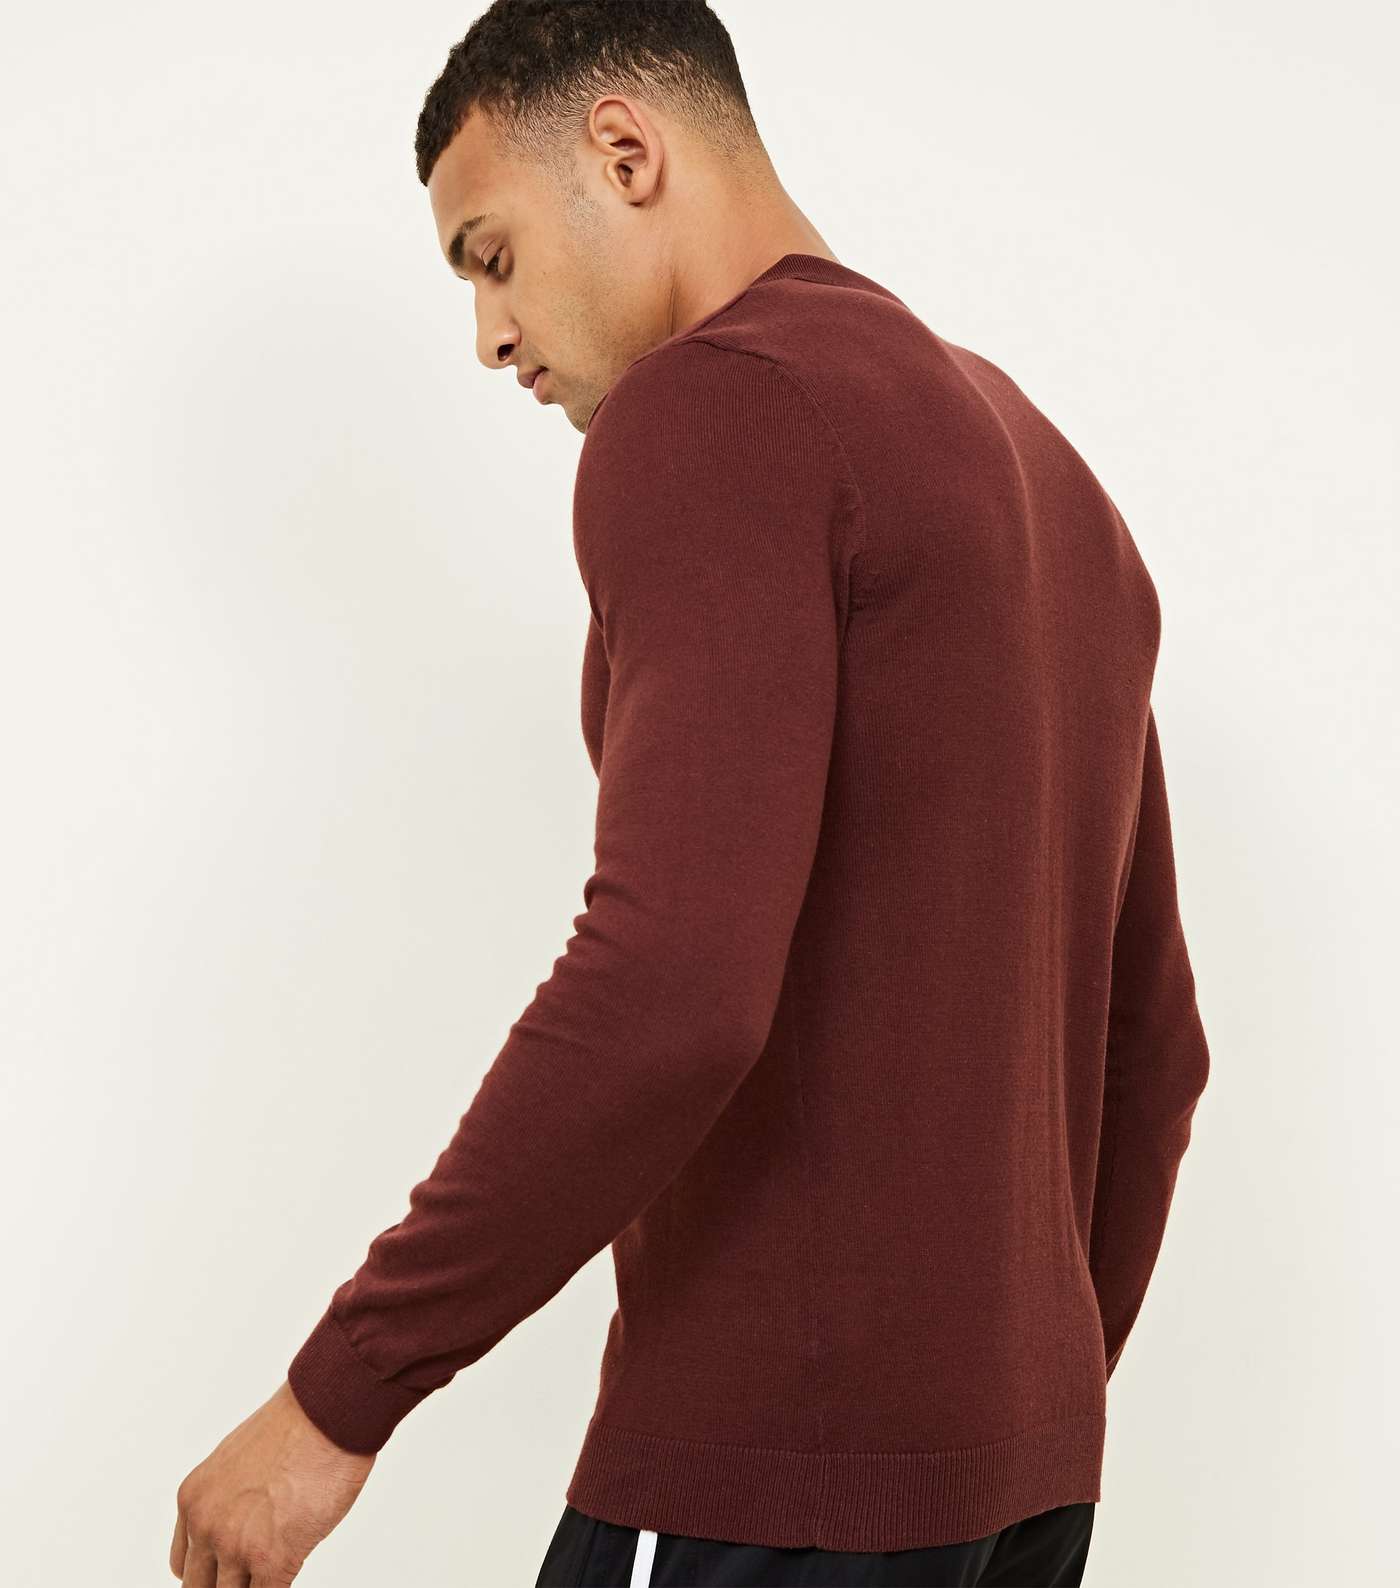 Burgundy Muscle Fit Long Sleeve Knit Polo Shirt Image 3